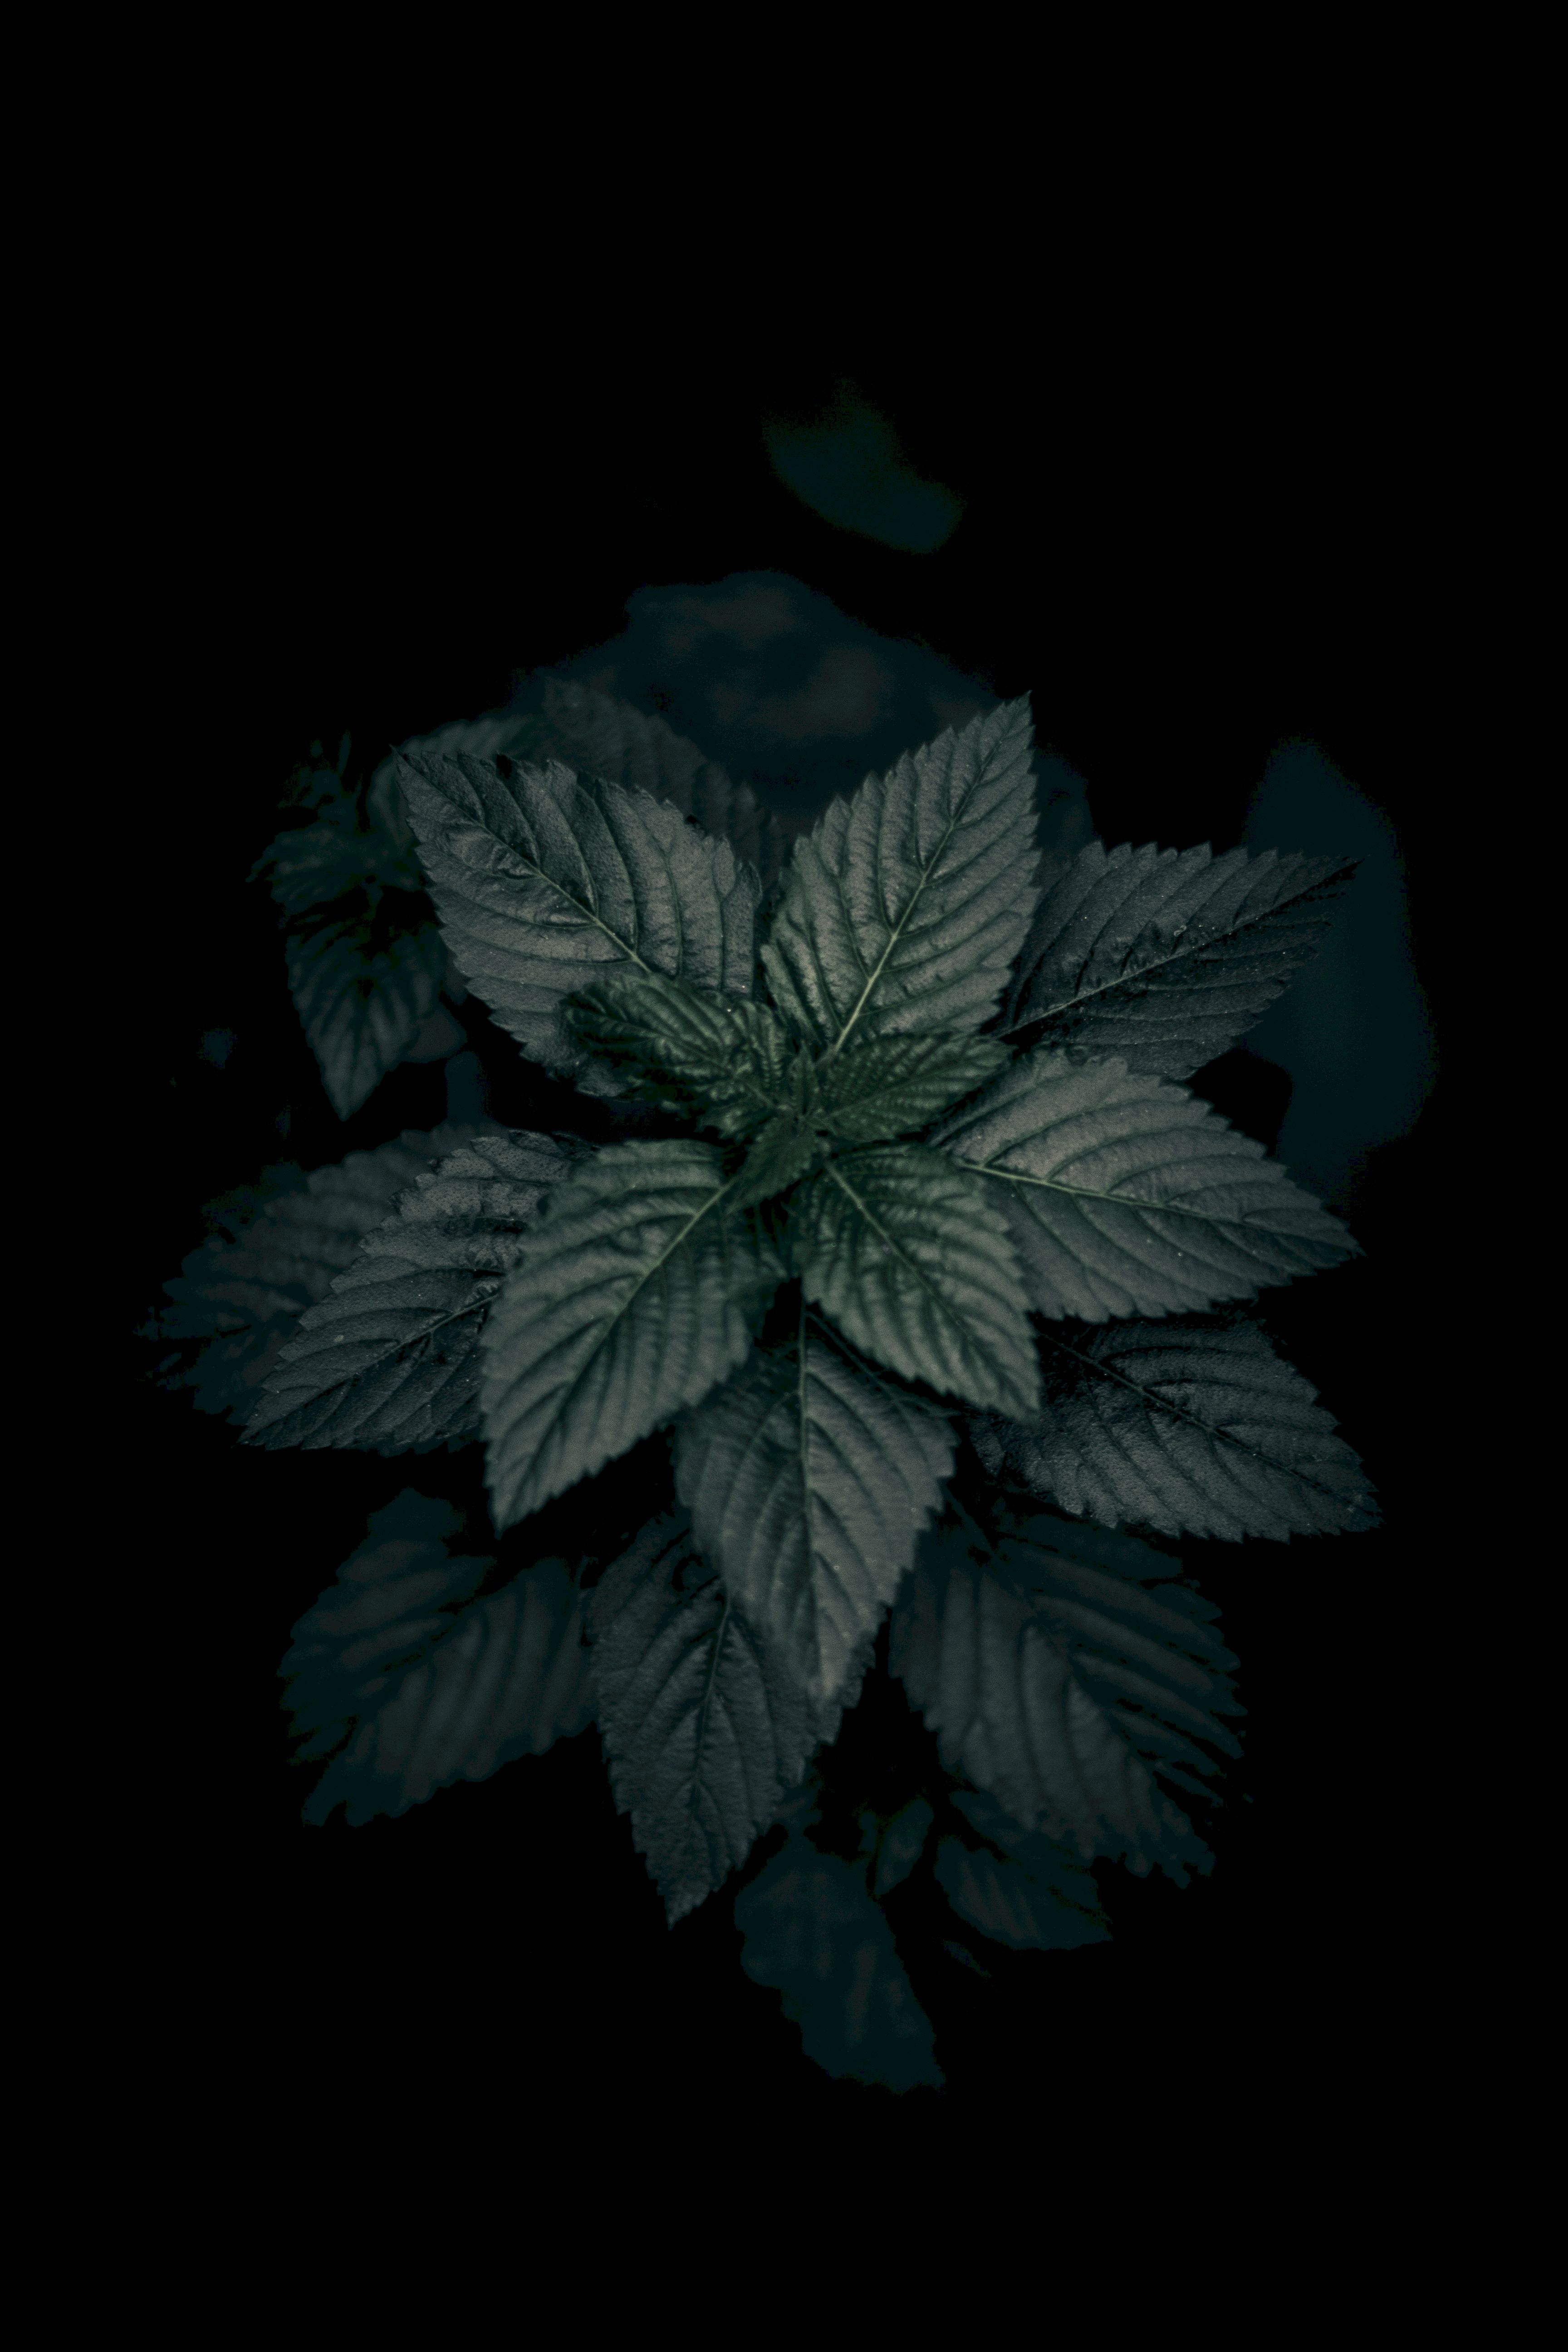 Download background dark, nature, leaves, green, plant, macro, close up